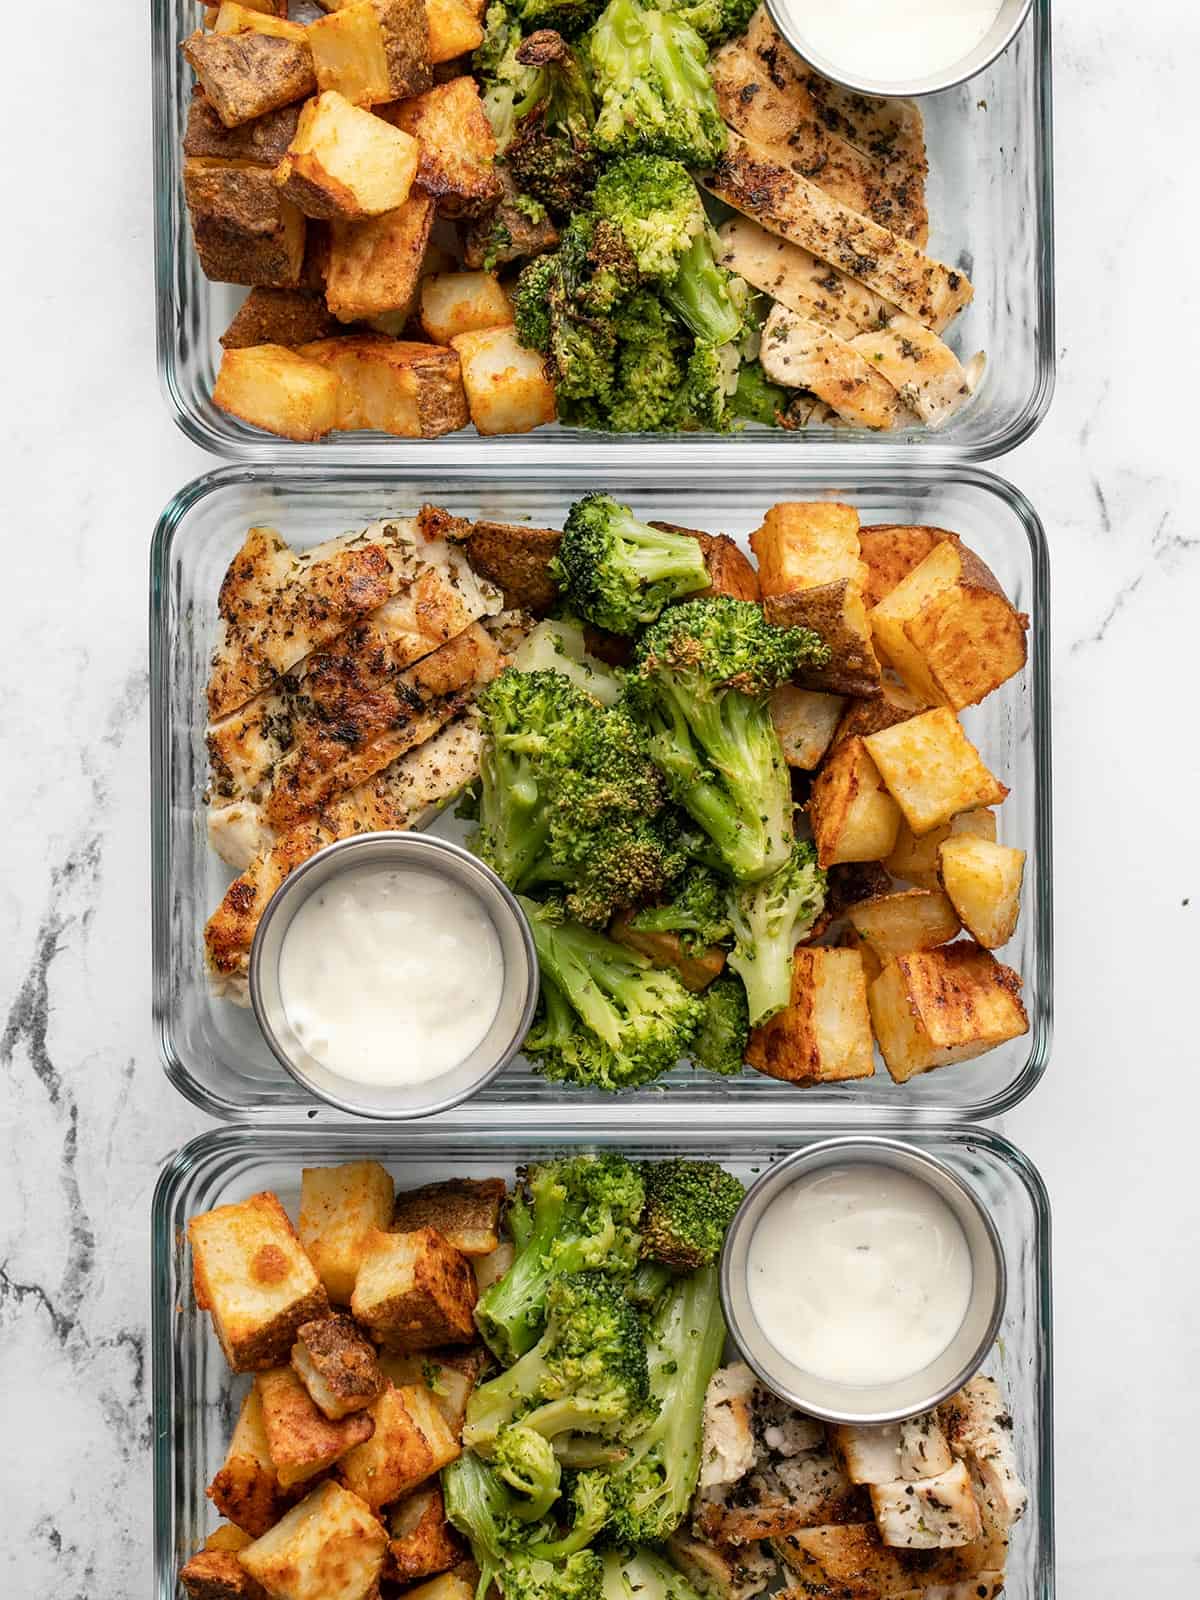 Chicken, potatoes, and broccoli divided into glass meal prep containers.